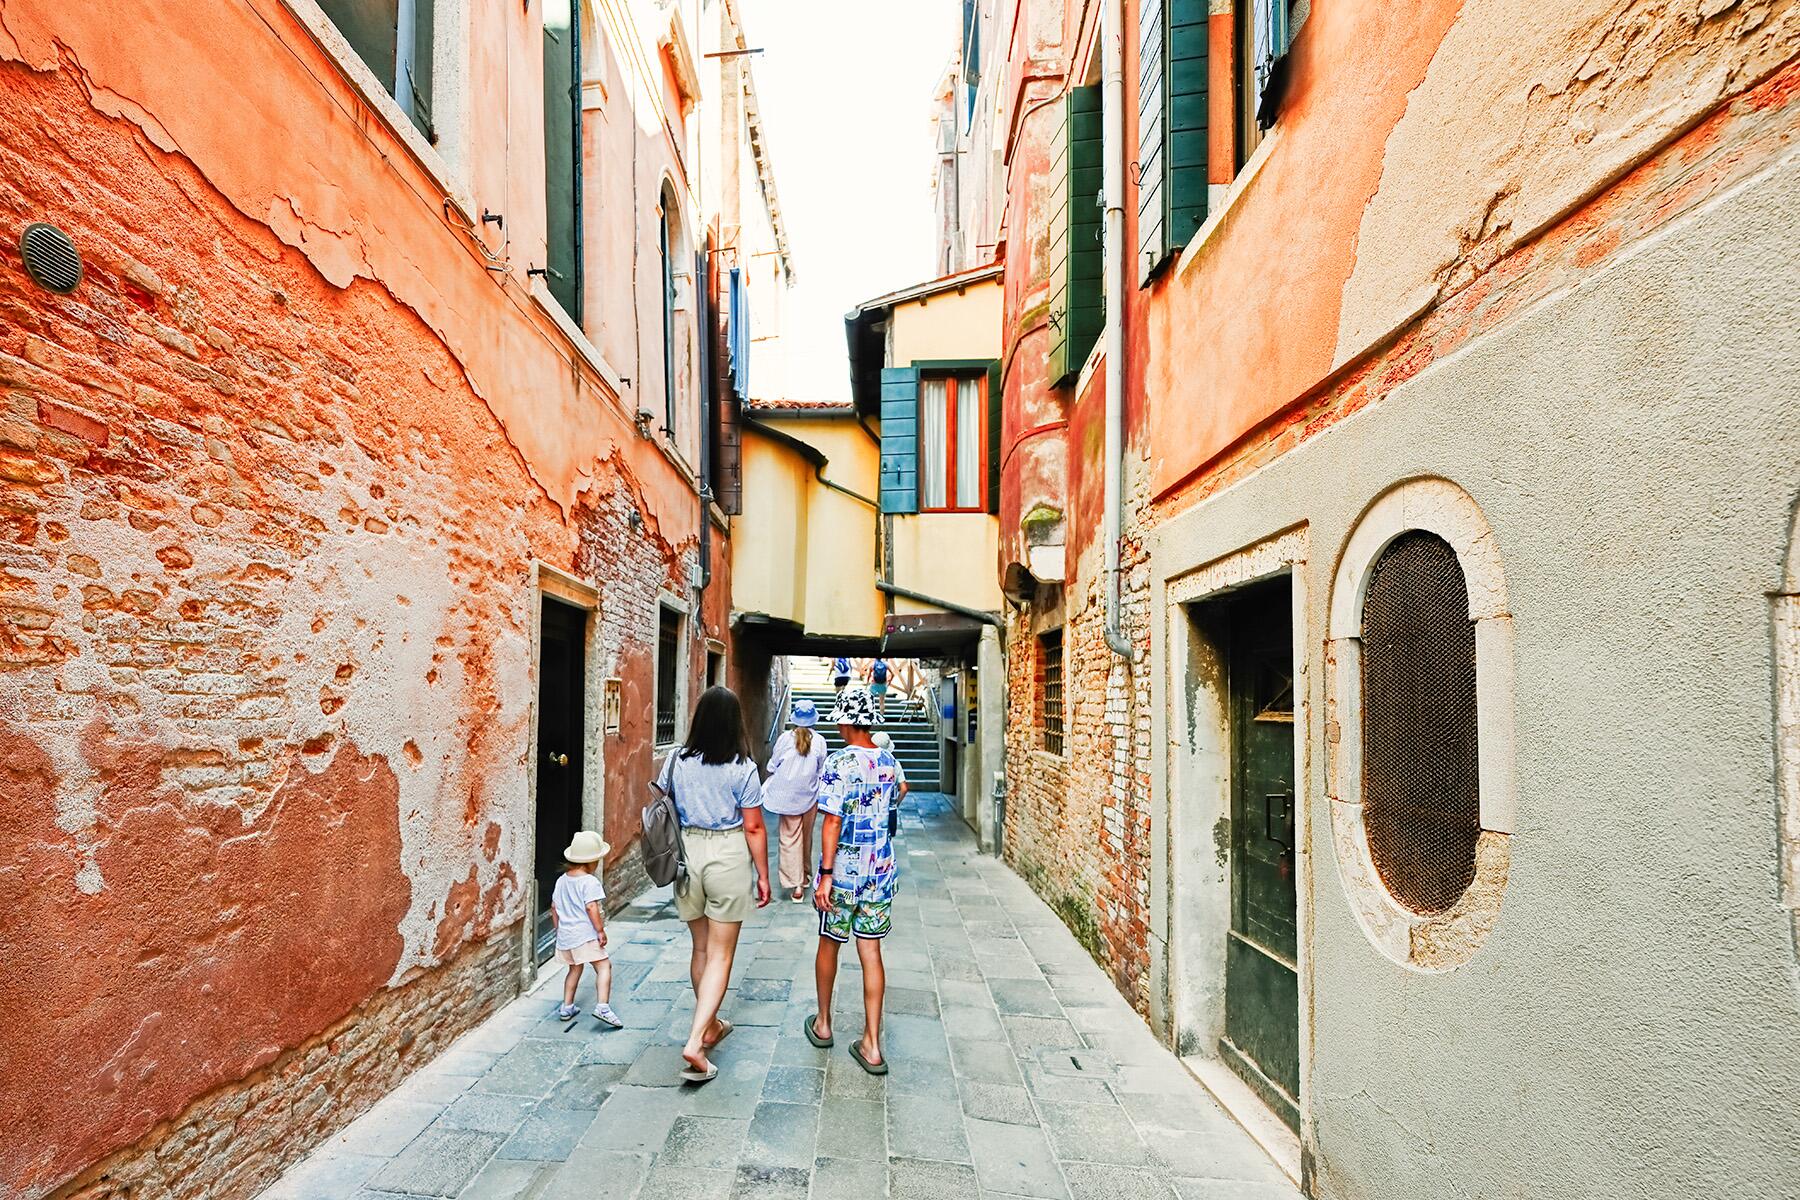 <a href='https://www.fodors.com/world/europe/italy/venice/experiences/news/photos/dont-do-these-things-in-venice-italy#'>From &quot;10 Things You Should NEVER Do if Visiting Venice: Don’t Walk on the Left&quot;</a>